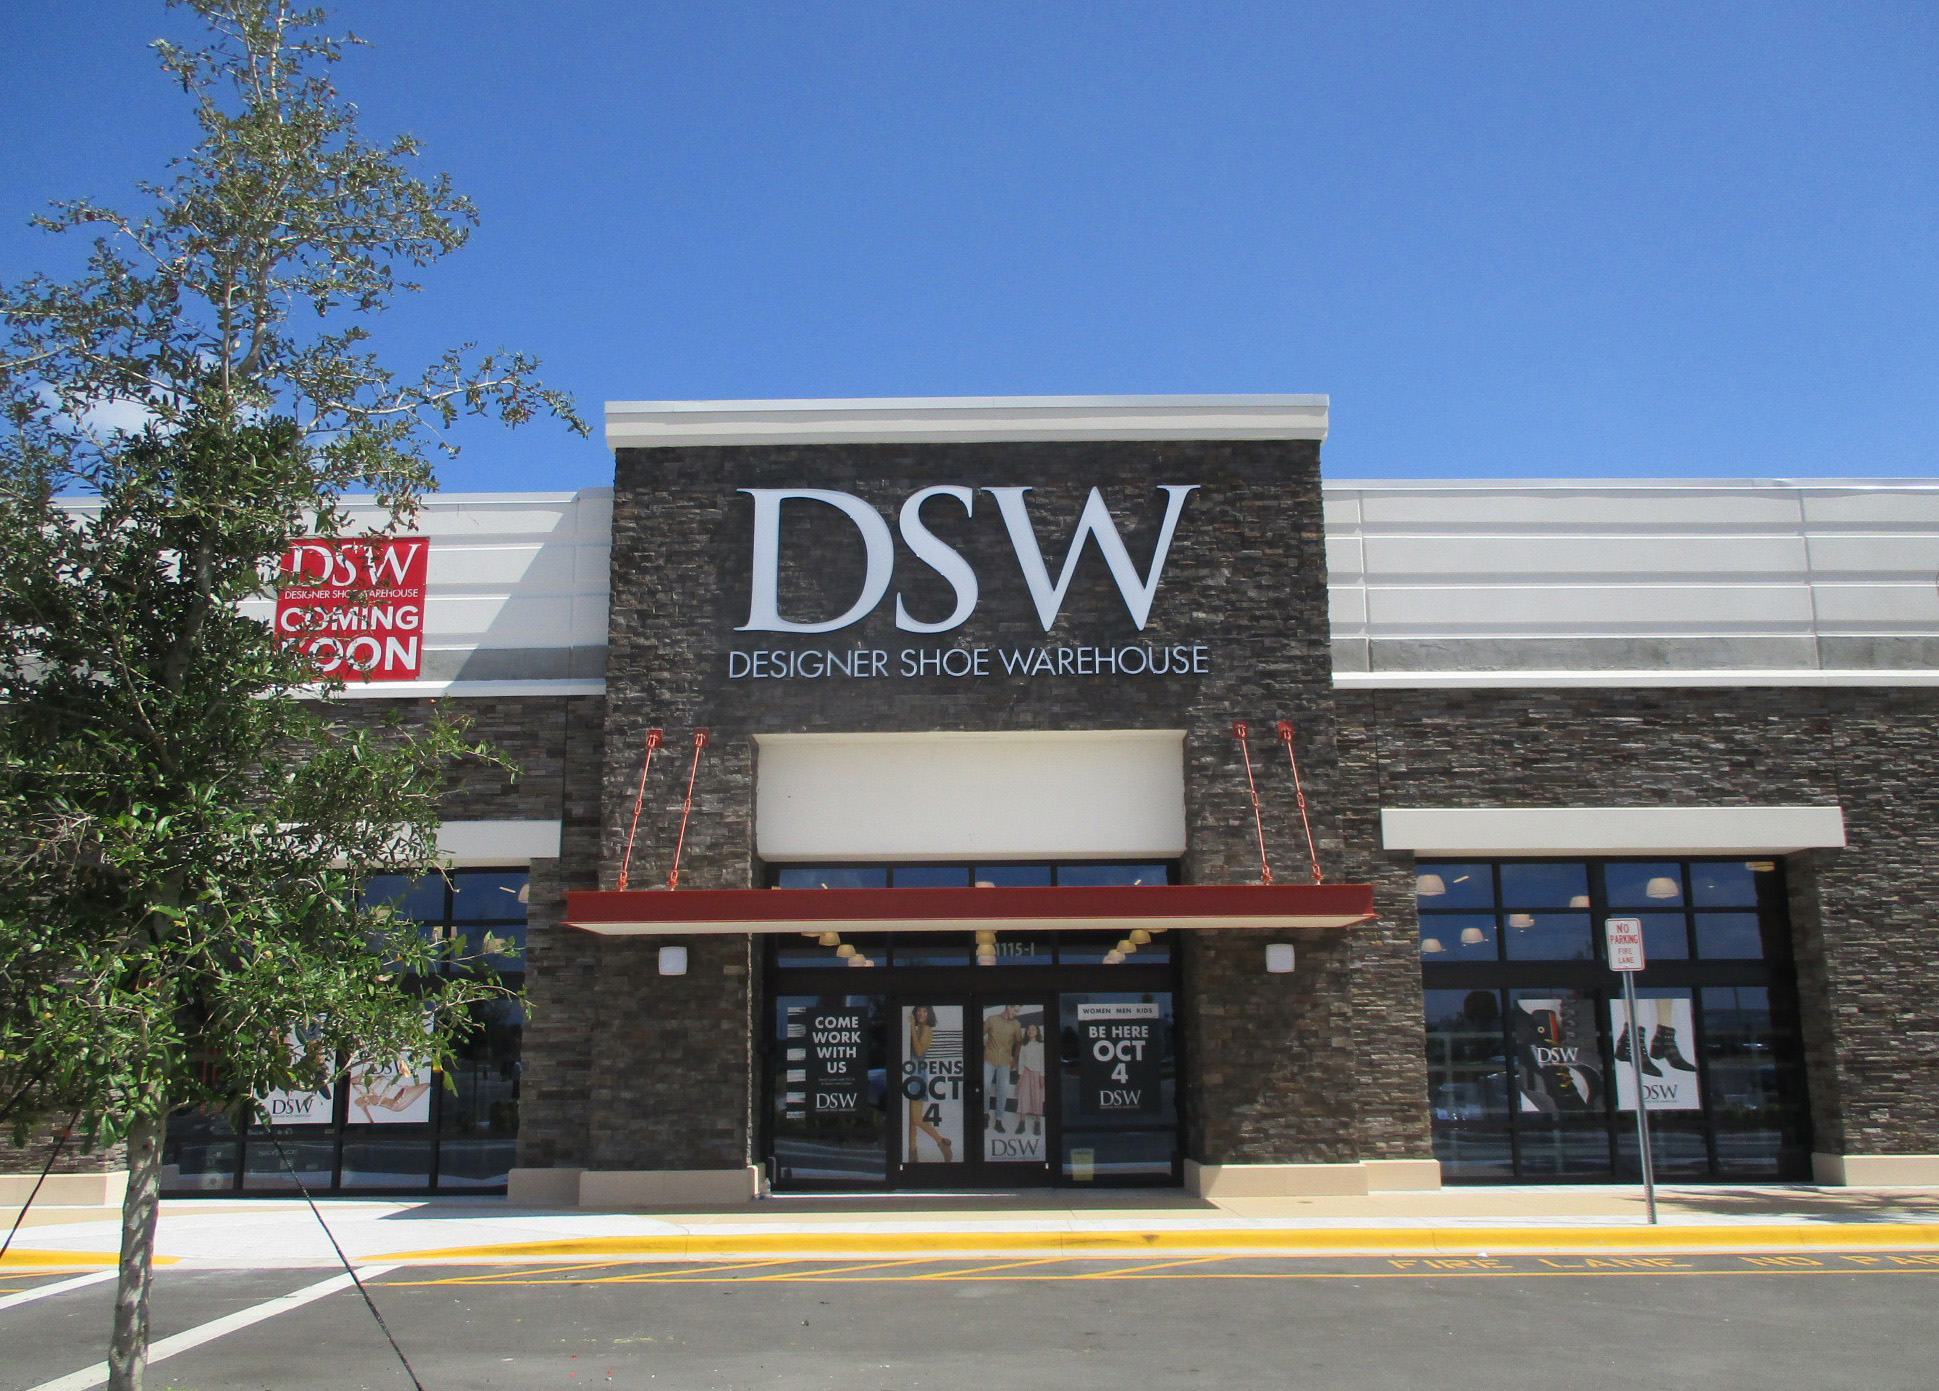 DSW has more than 500 locations in 44 states and Canada